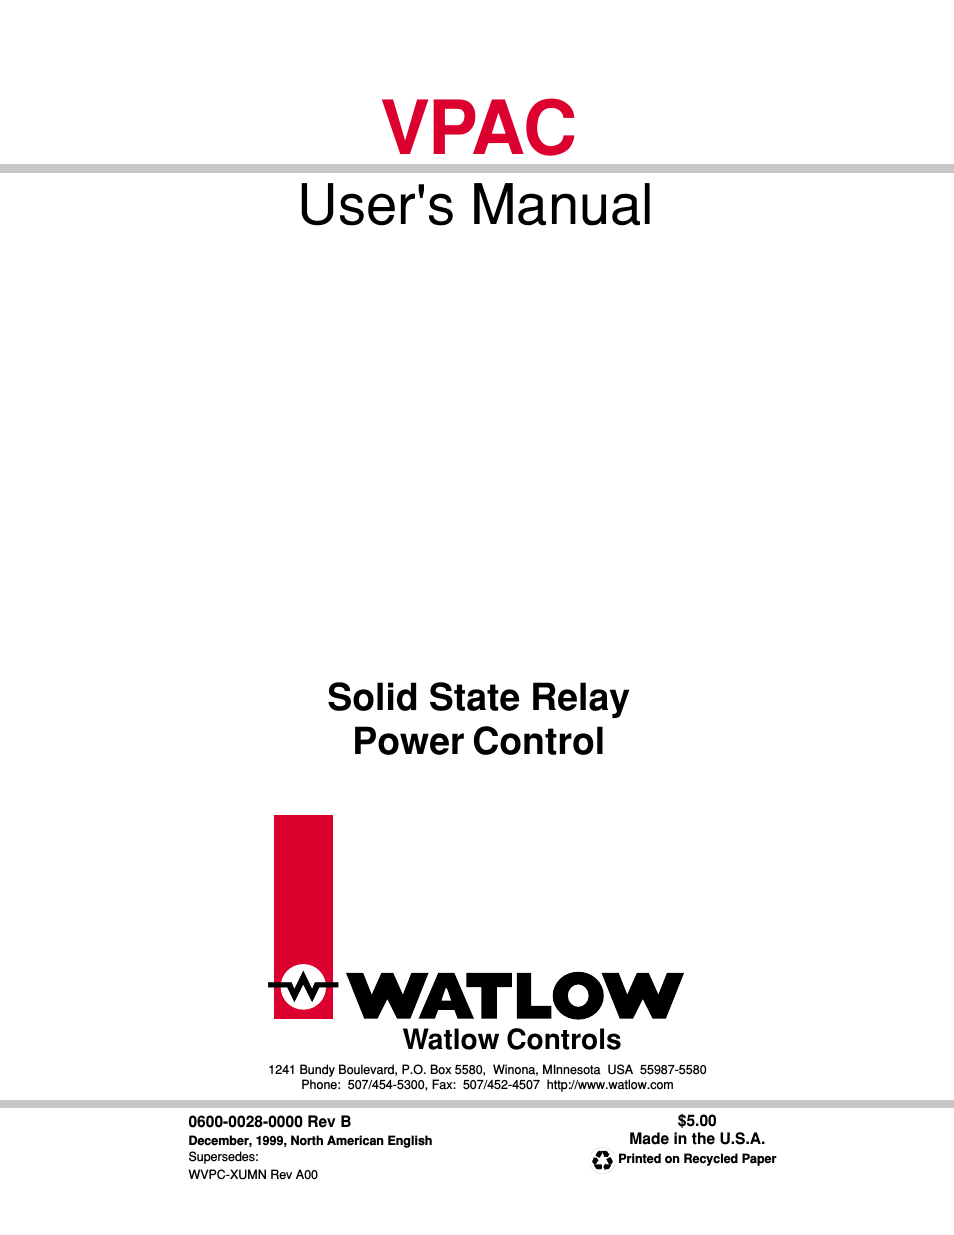 VPAC Solid State Relay Power Control